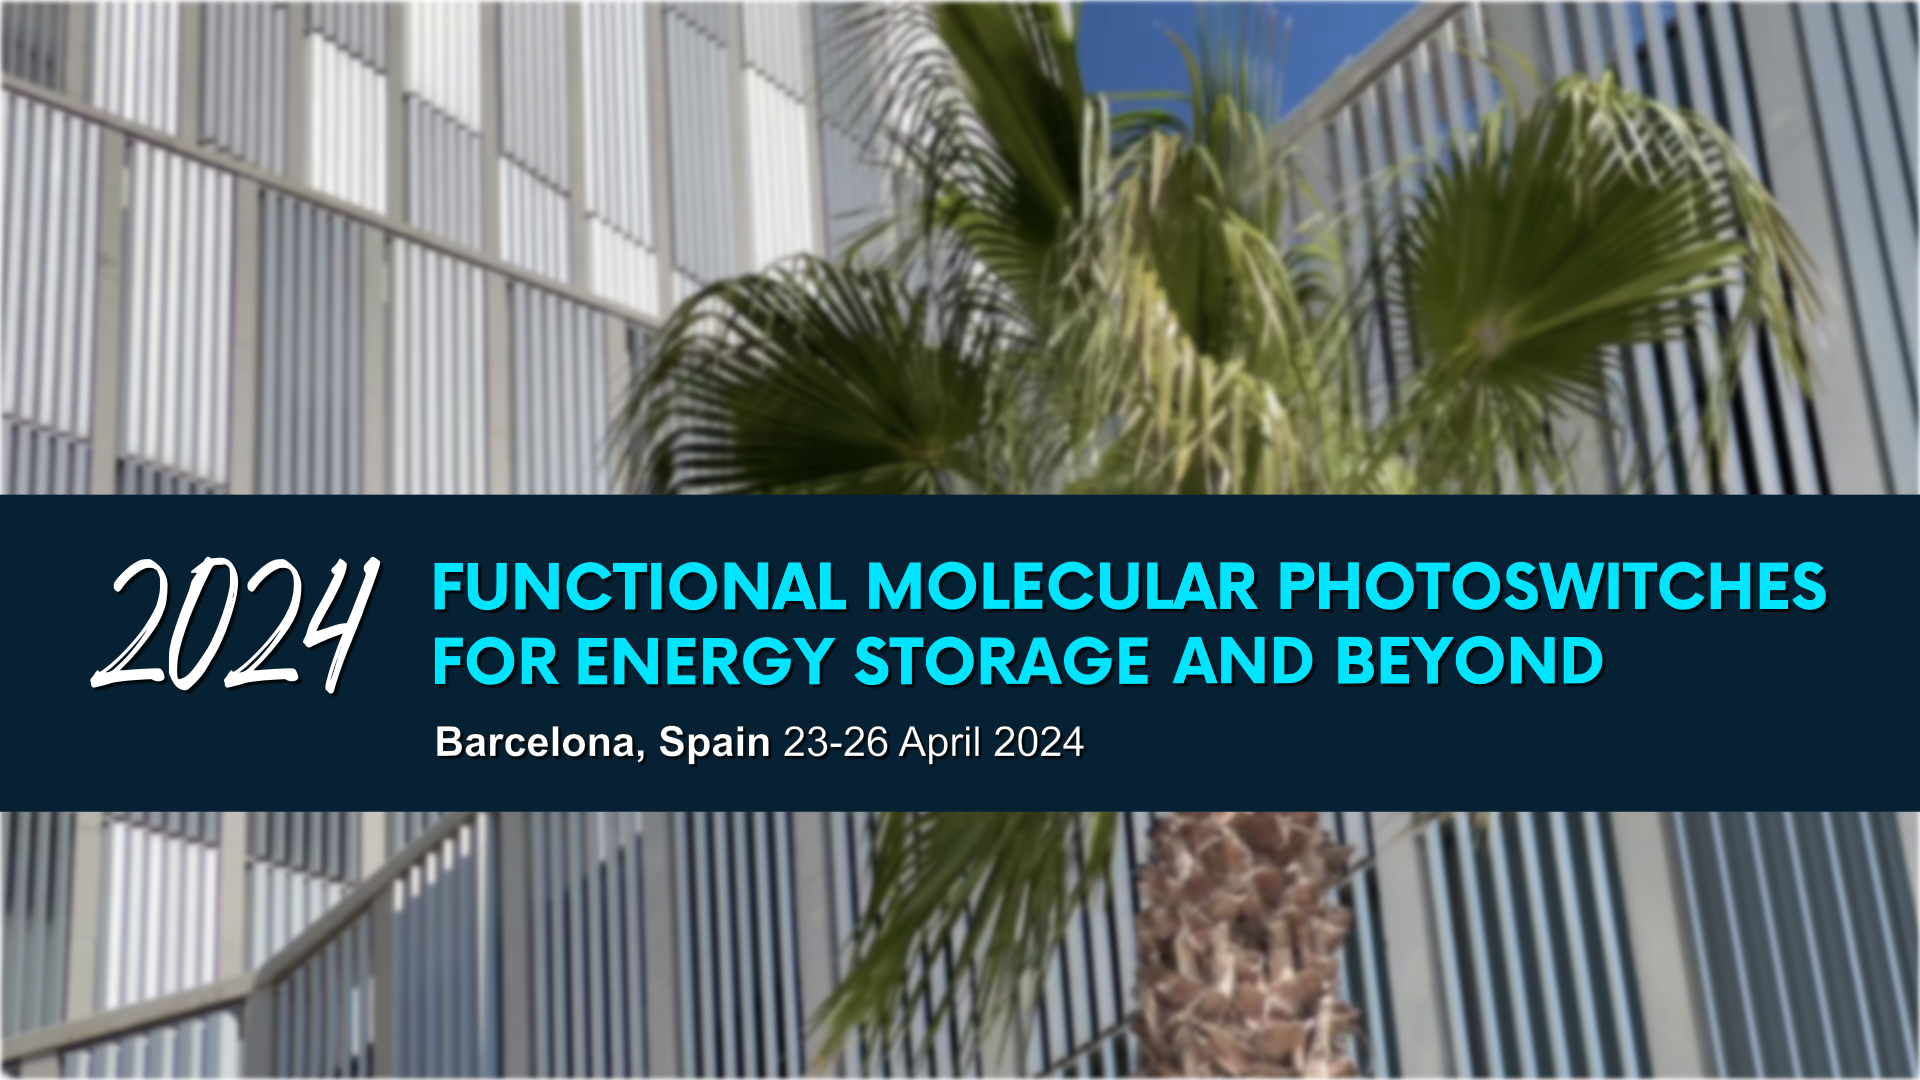 Functional molecular photoswitches for energy storage and beyond